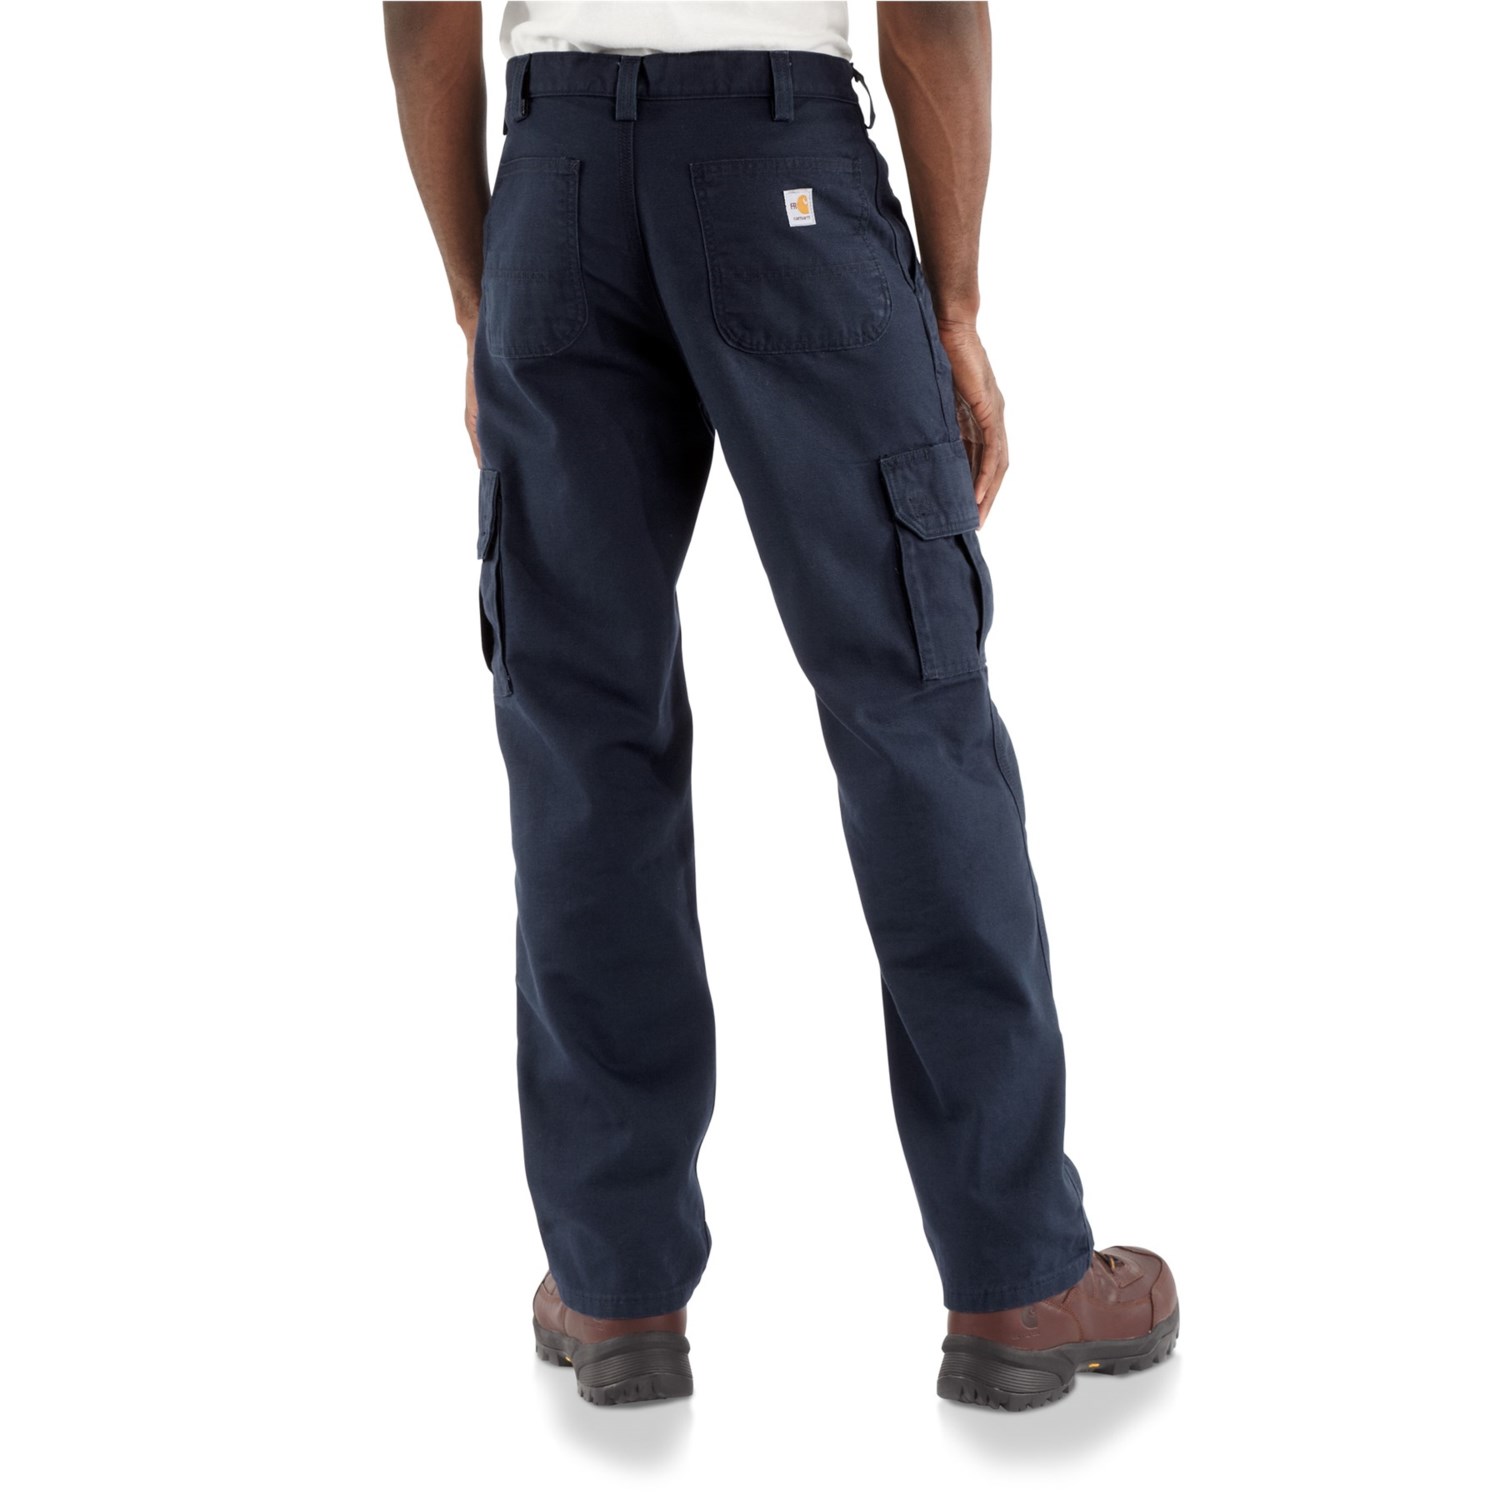 Carhartt FRB240 Flame-Resistant Canvas Cargo Pants (For Big and Tall Men)